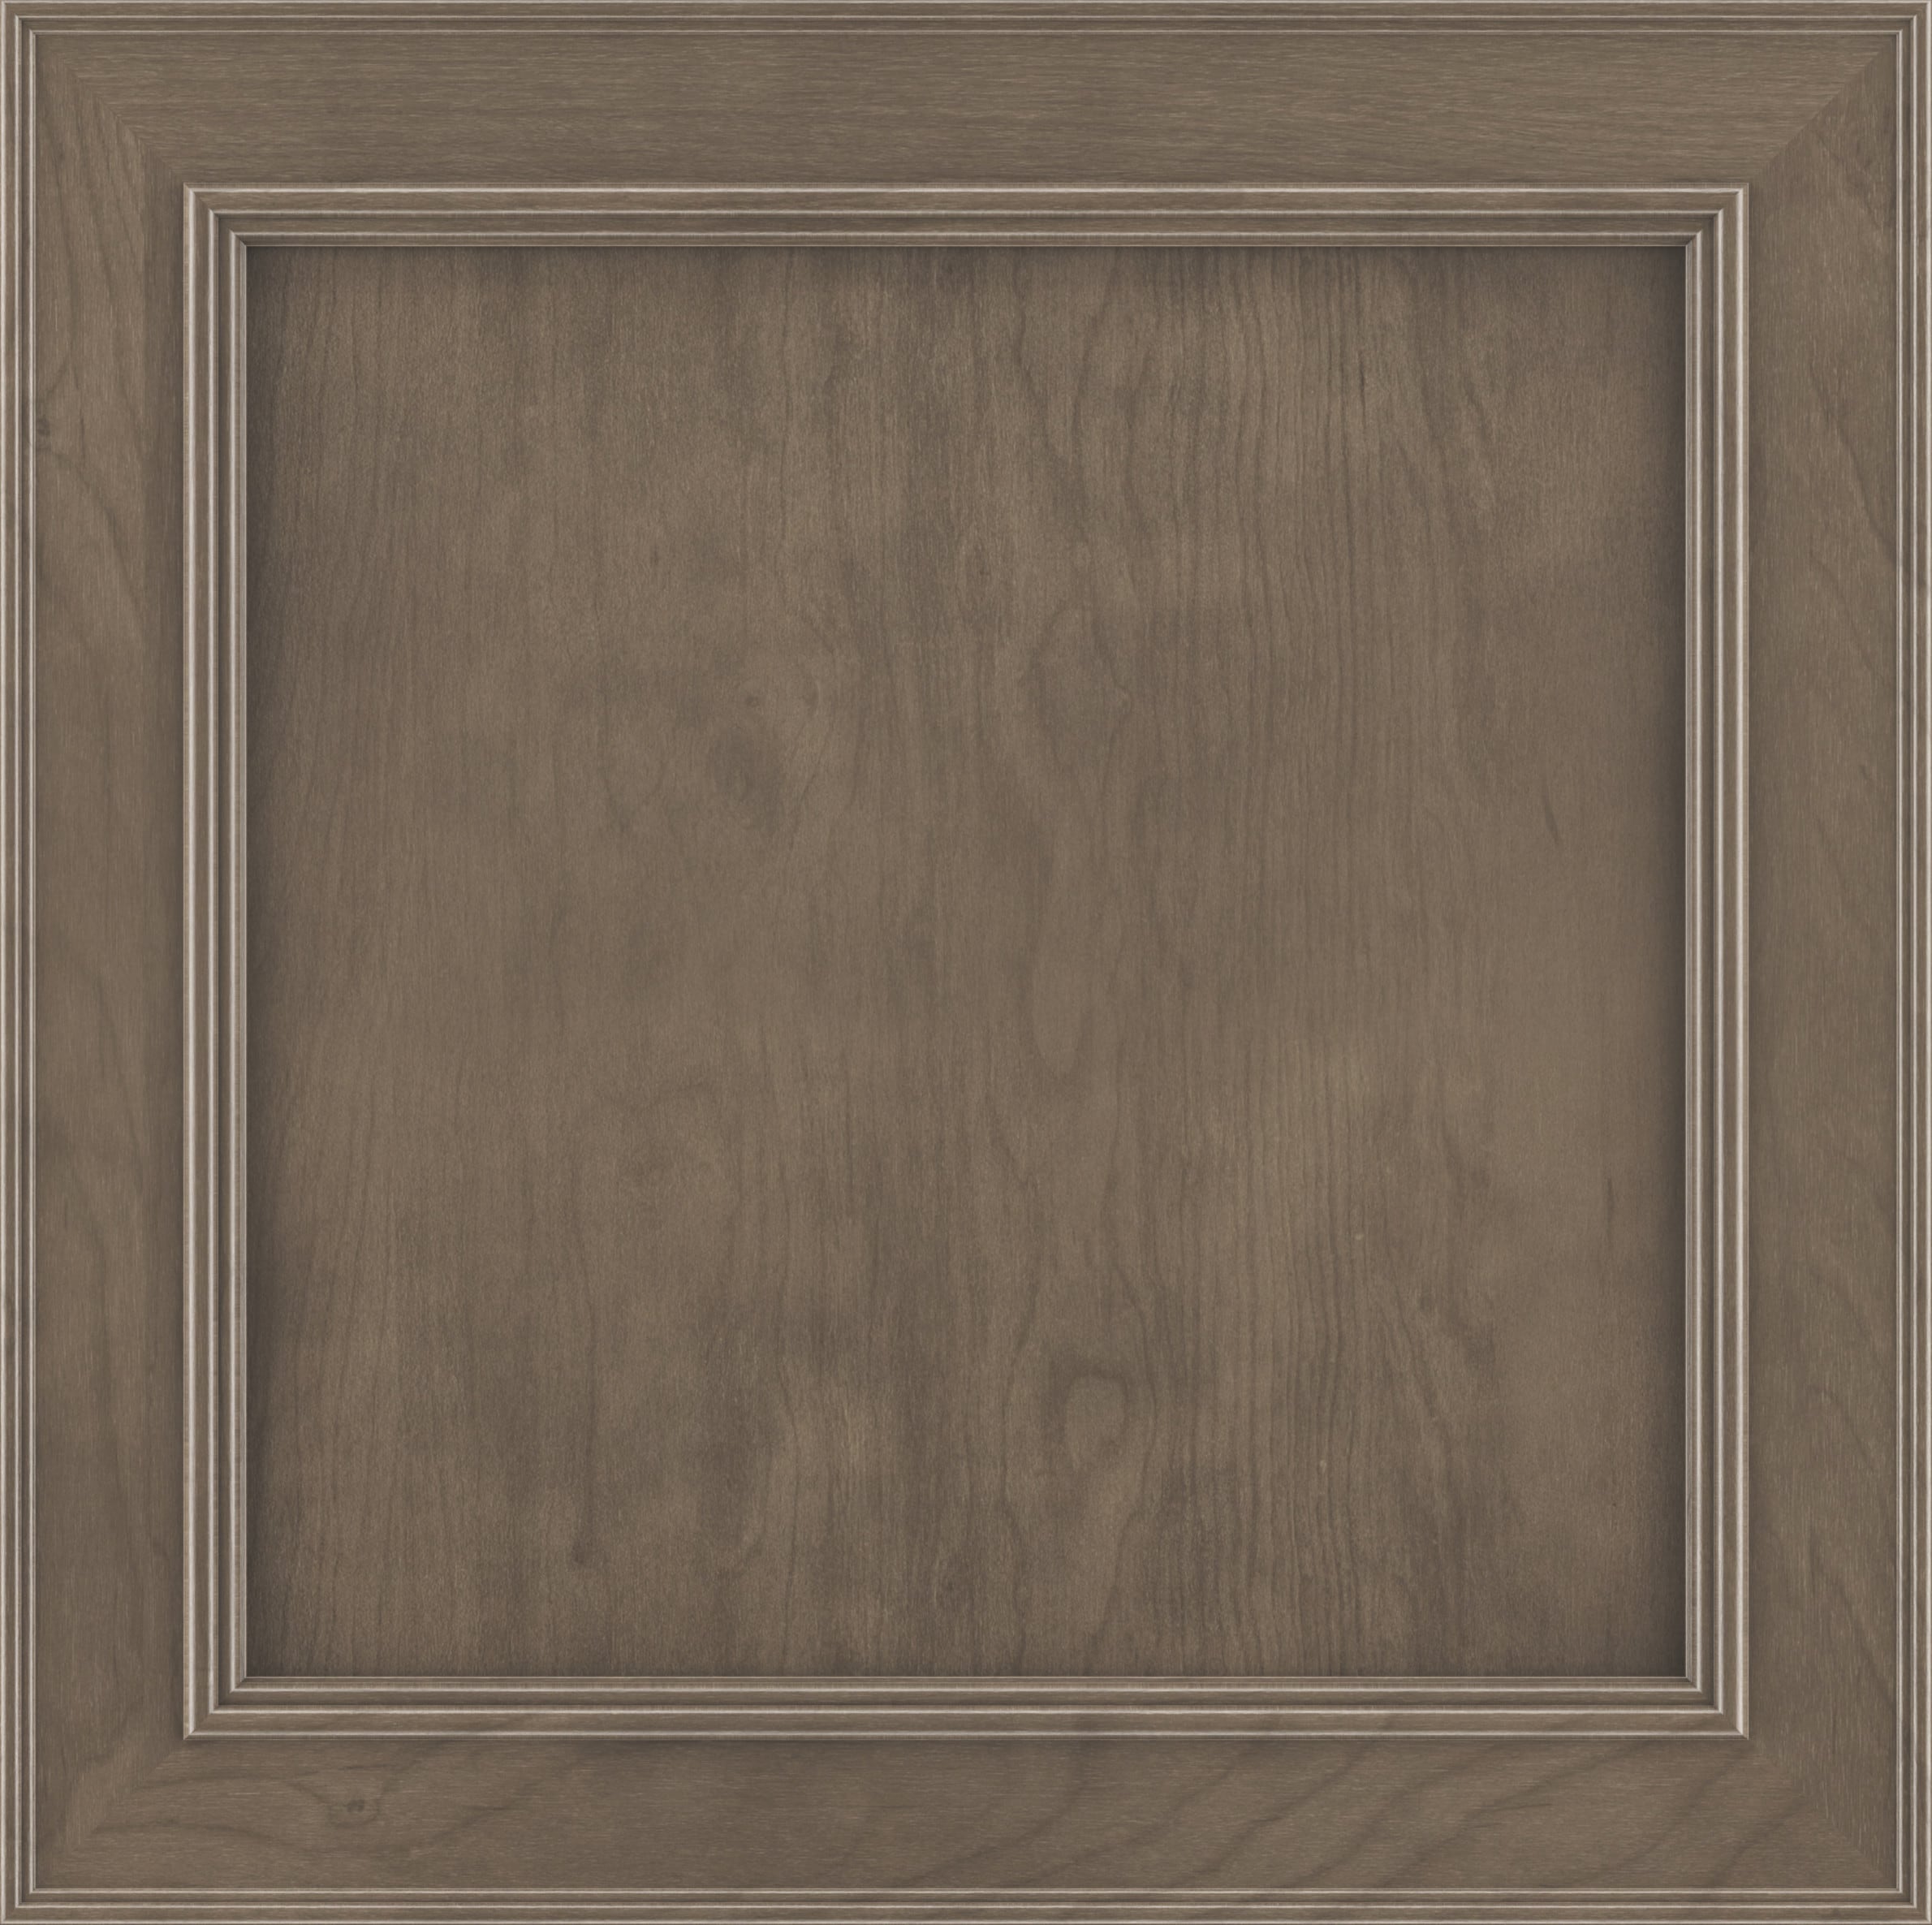 Shenandoah Irvington 14 5625 In W X 5 H Latte Stained Maple Kitchen Cabinet Sample Door Brown 97974